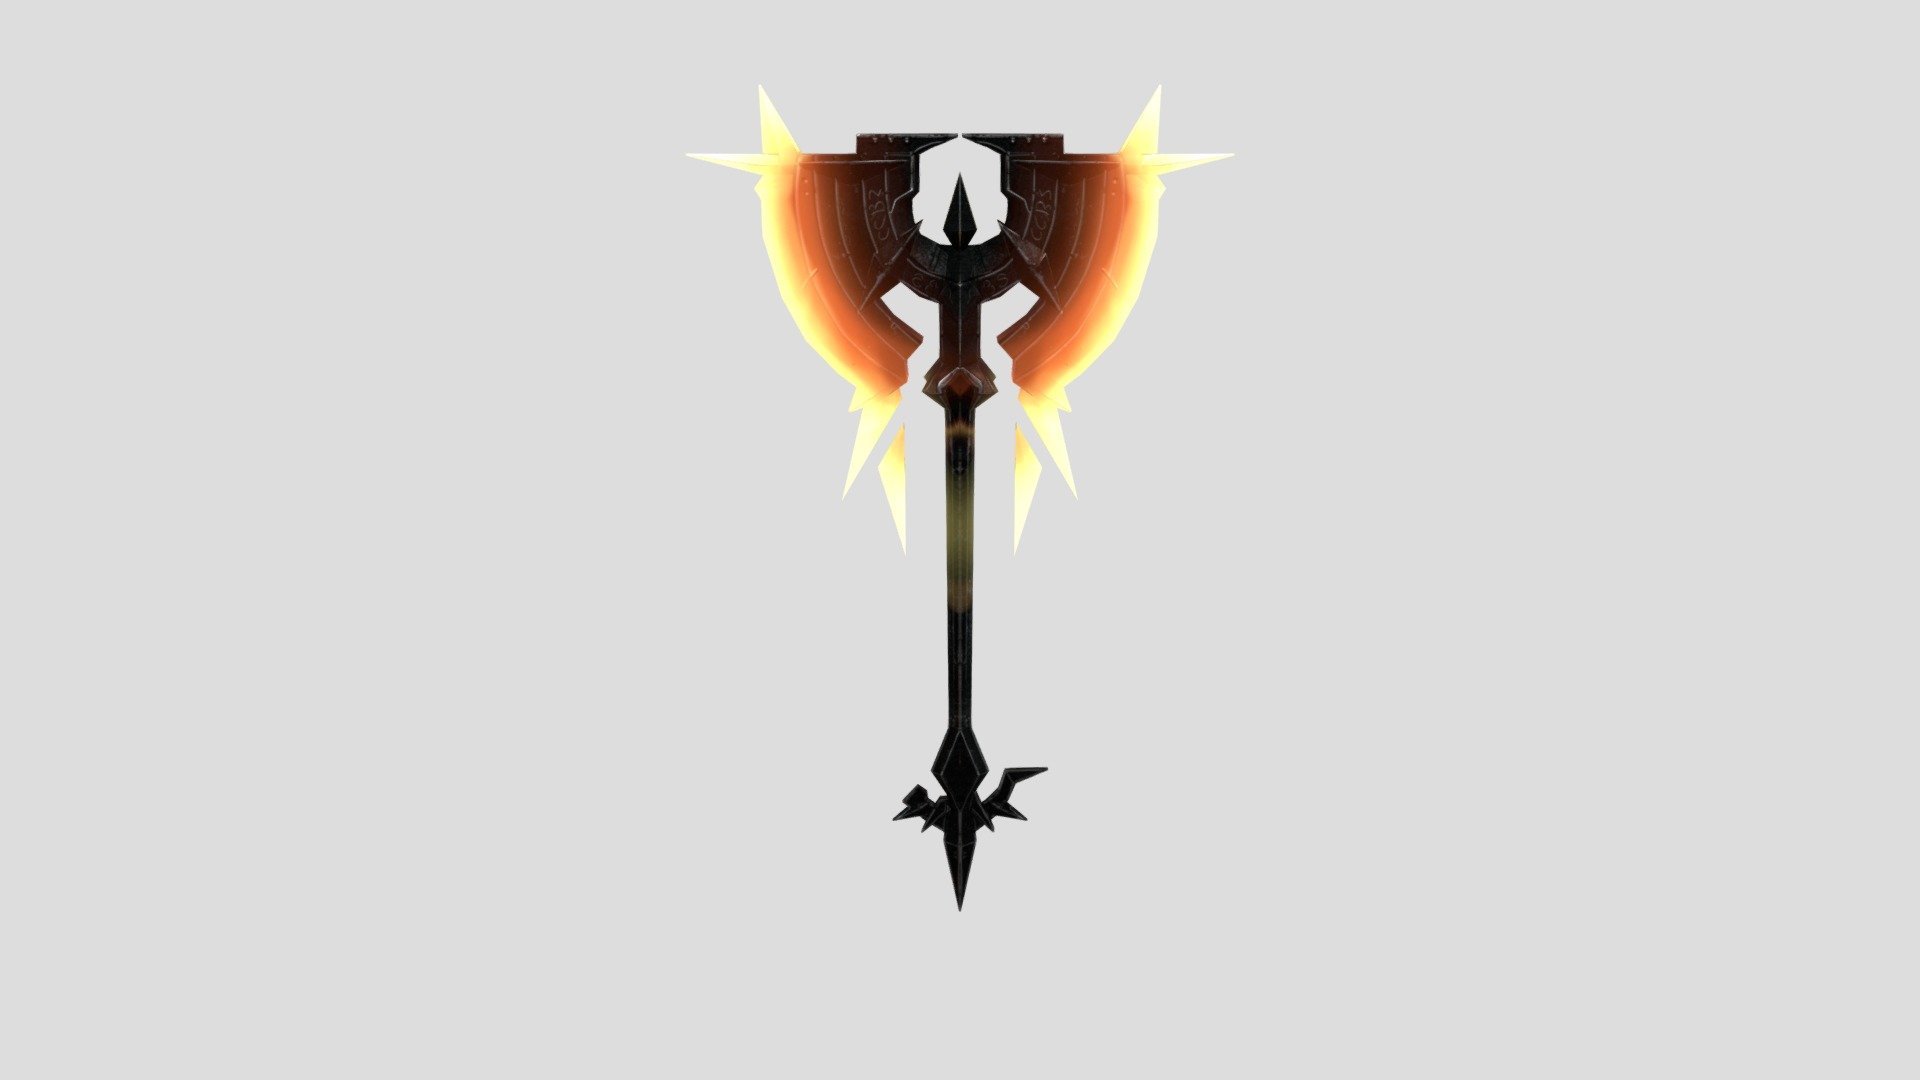 i fund this weapon in pinterest, I don't know who is the creator, but i create this 3d model in blender and texture it in substance - FireAxe - 3D model by franciscotbguzman 3d model